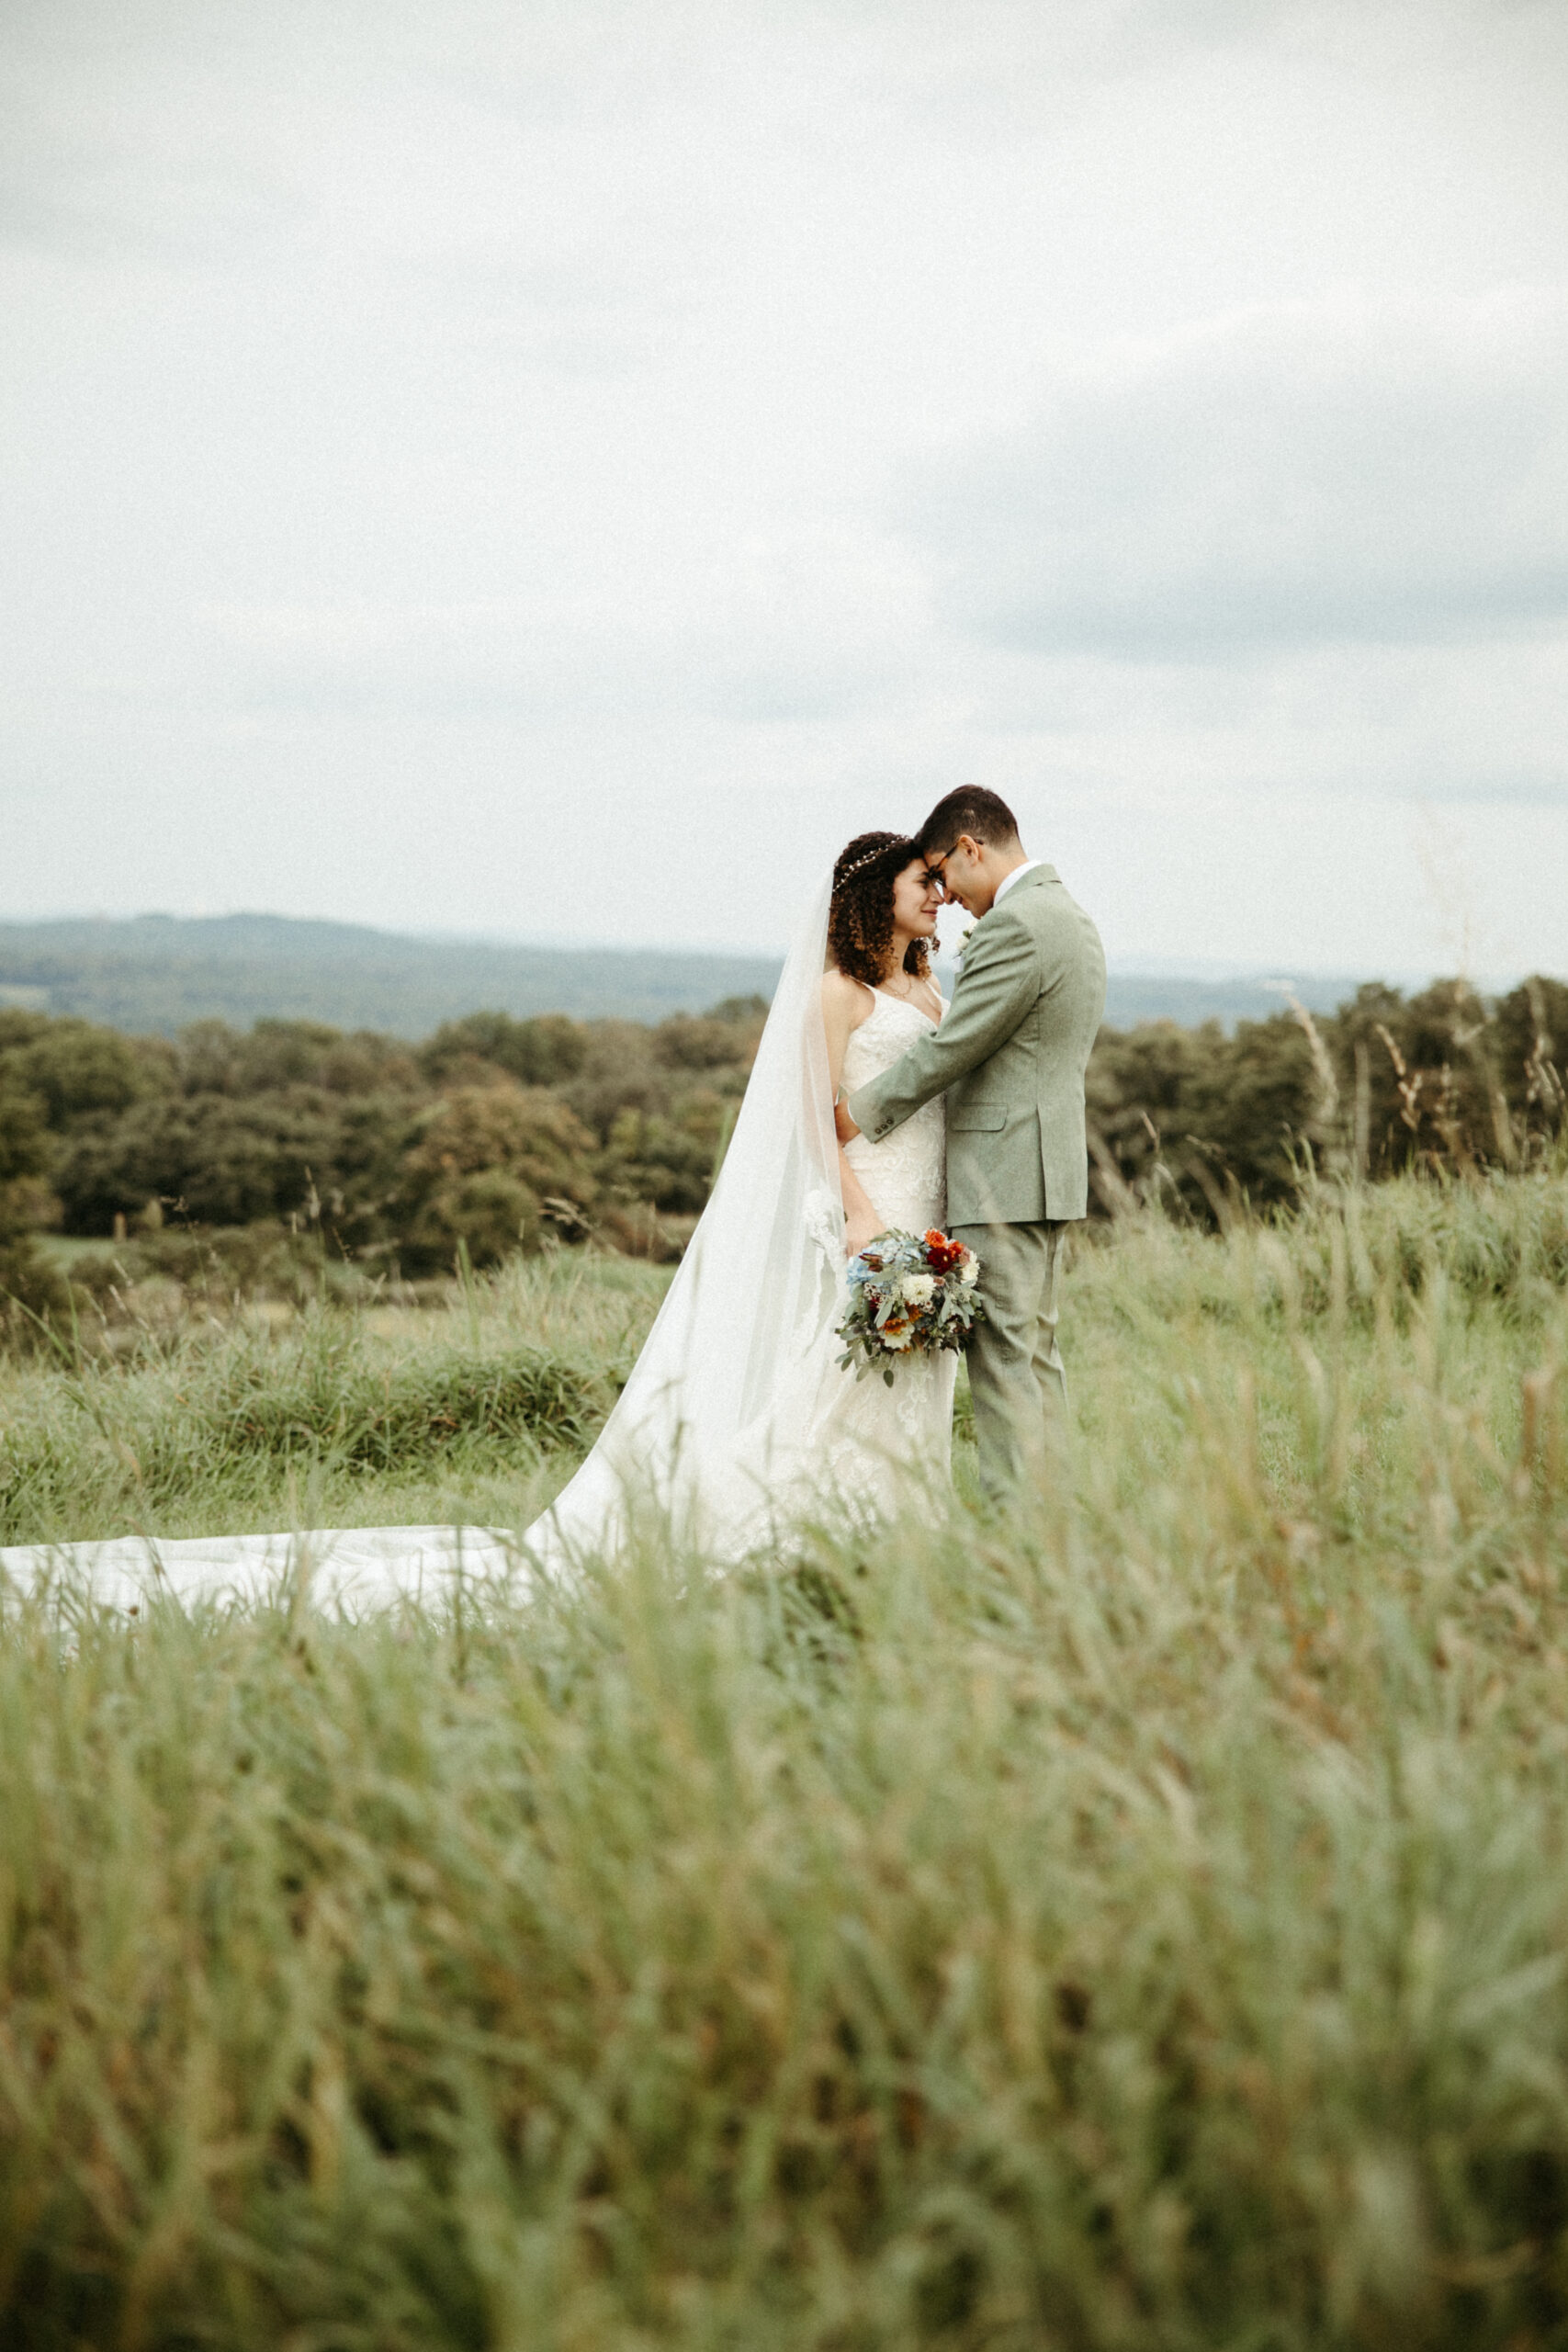 Majestic mountain views frame the couple at Red Maple Vineyard, adding natural beauty to the celebration.